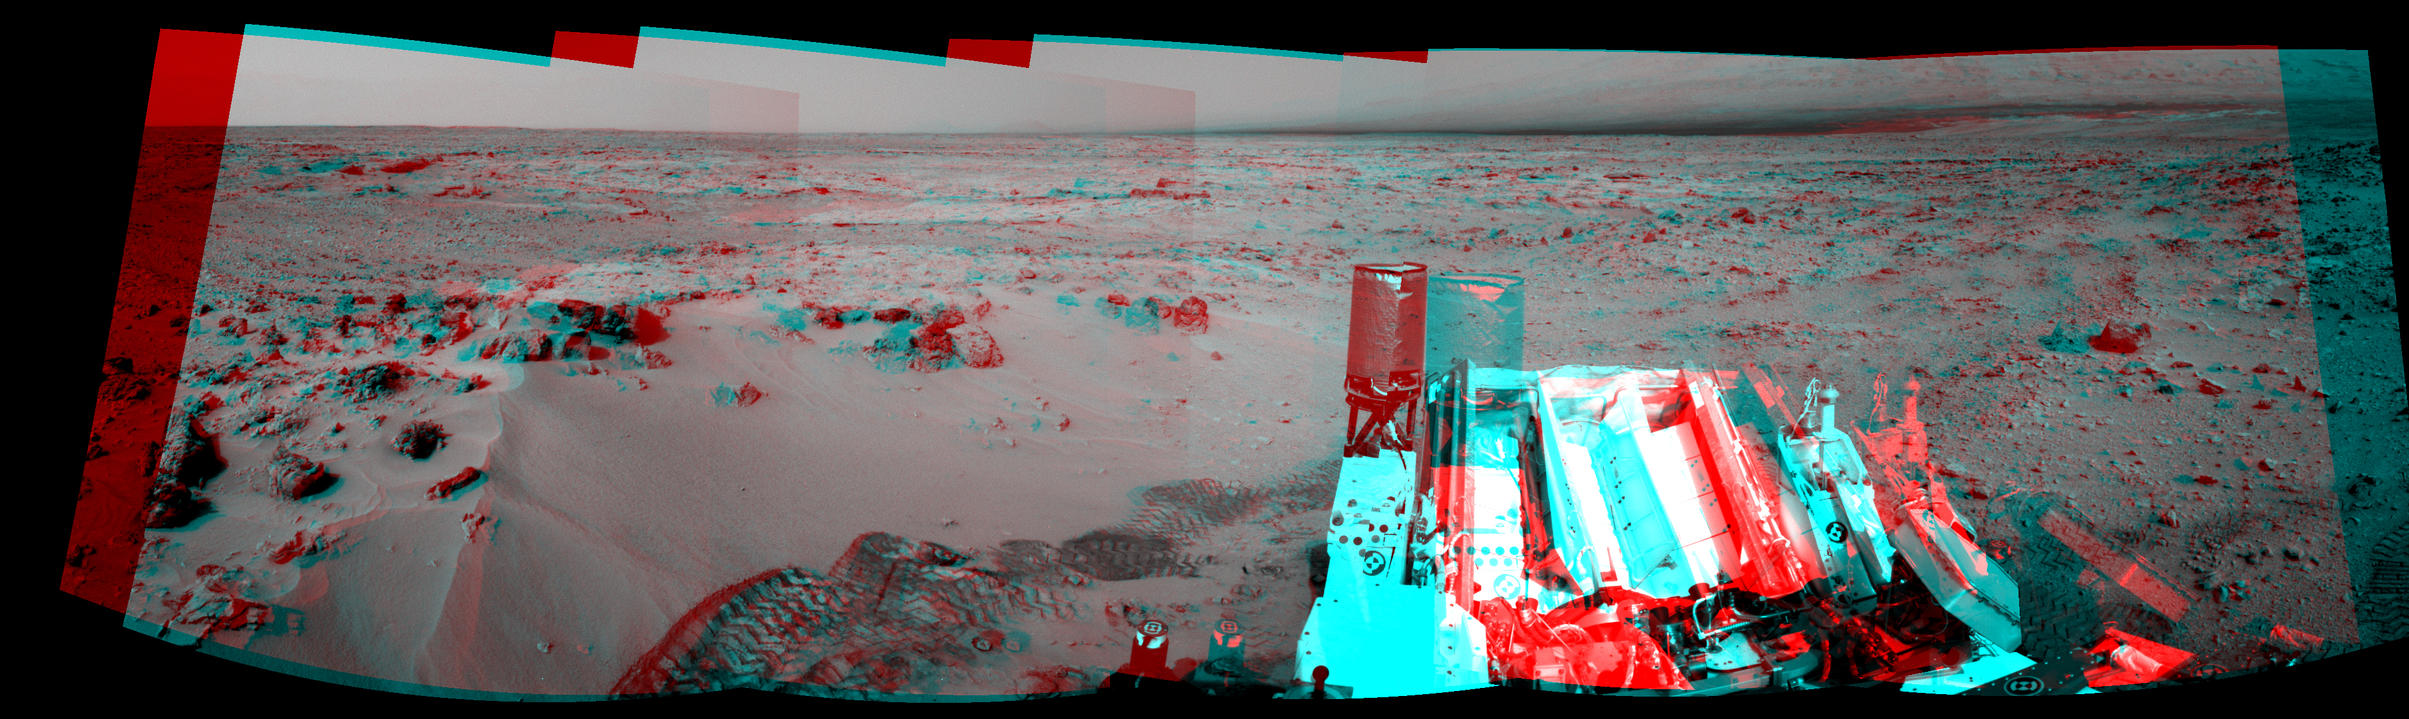 Curiosity's Eastward View After Sol 100 Drive, Stereo